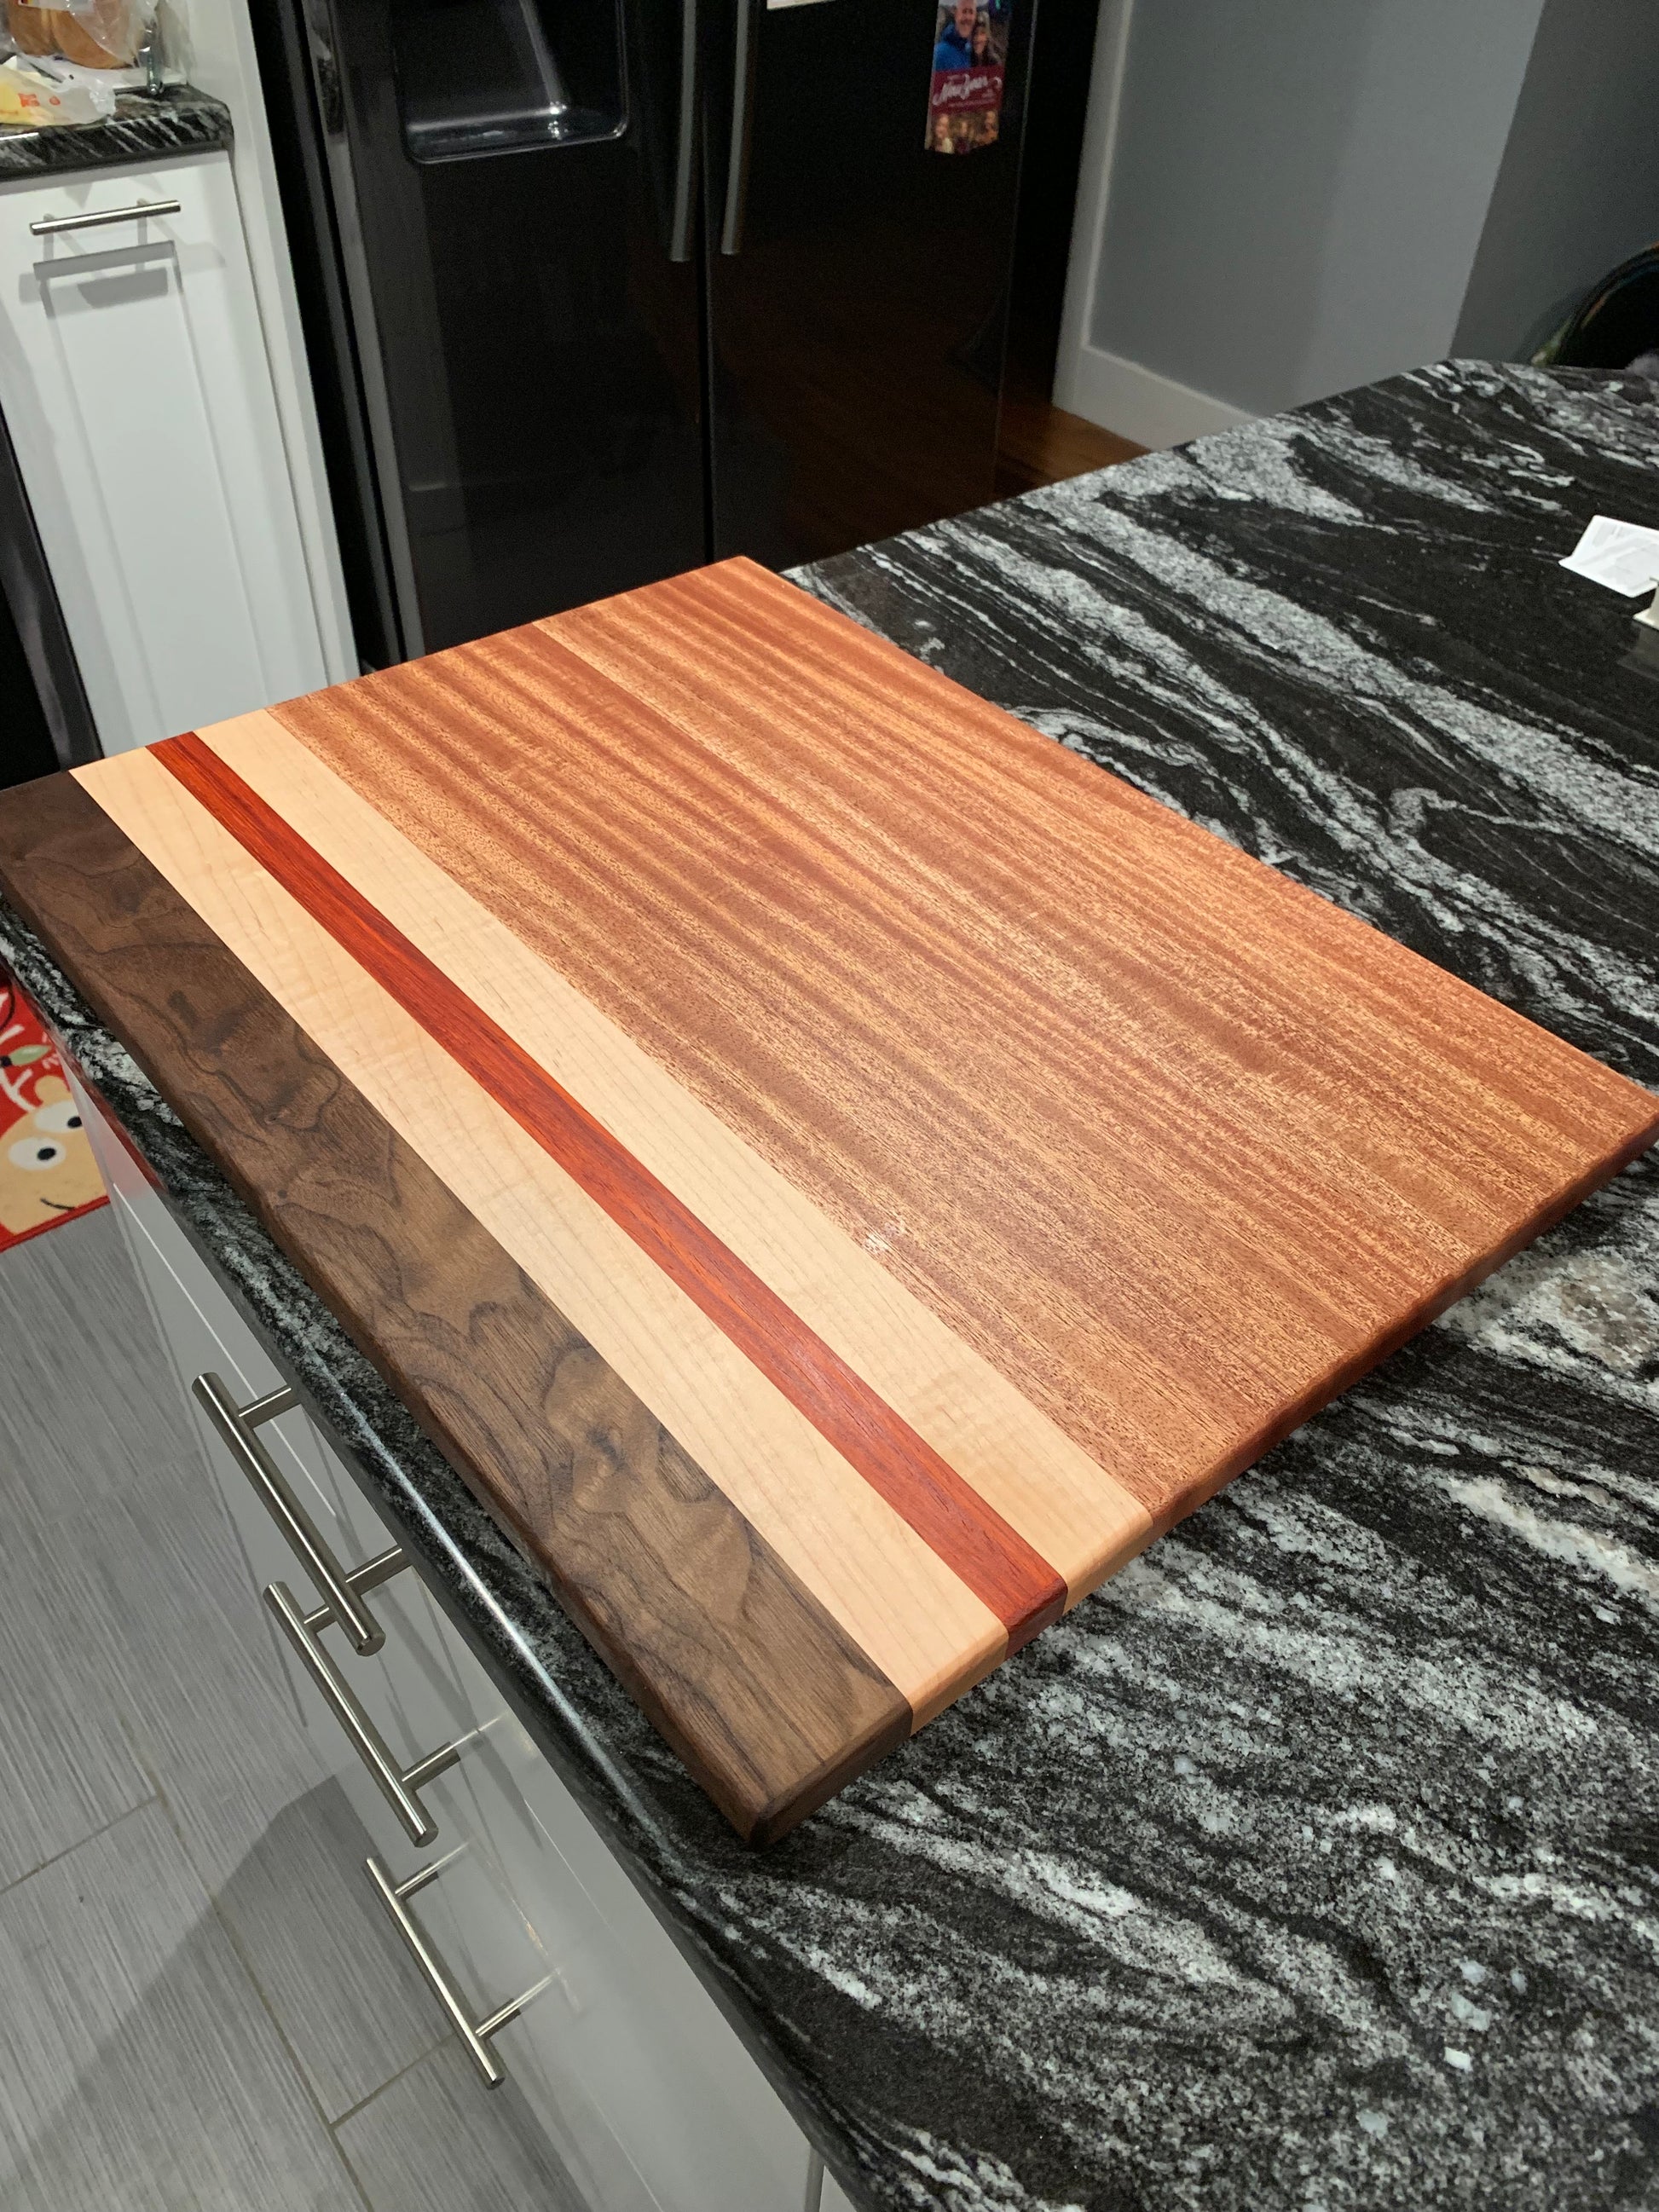 Timber Kitchen Boards